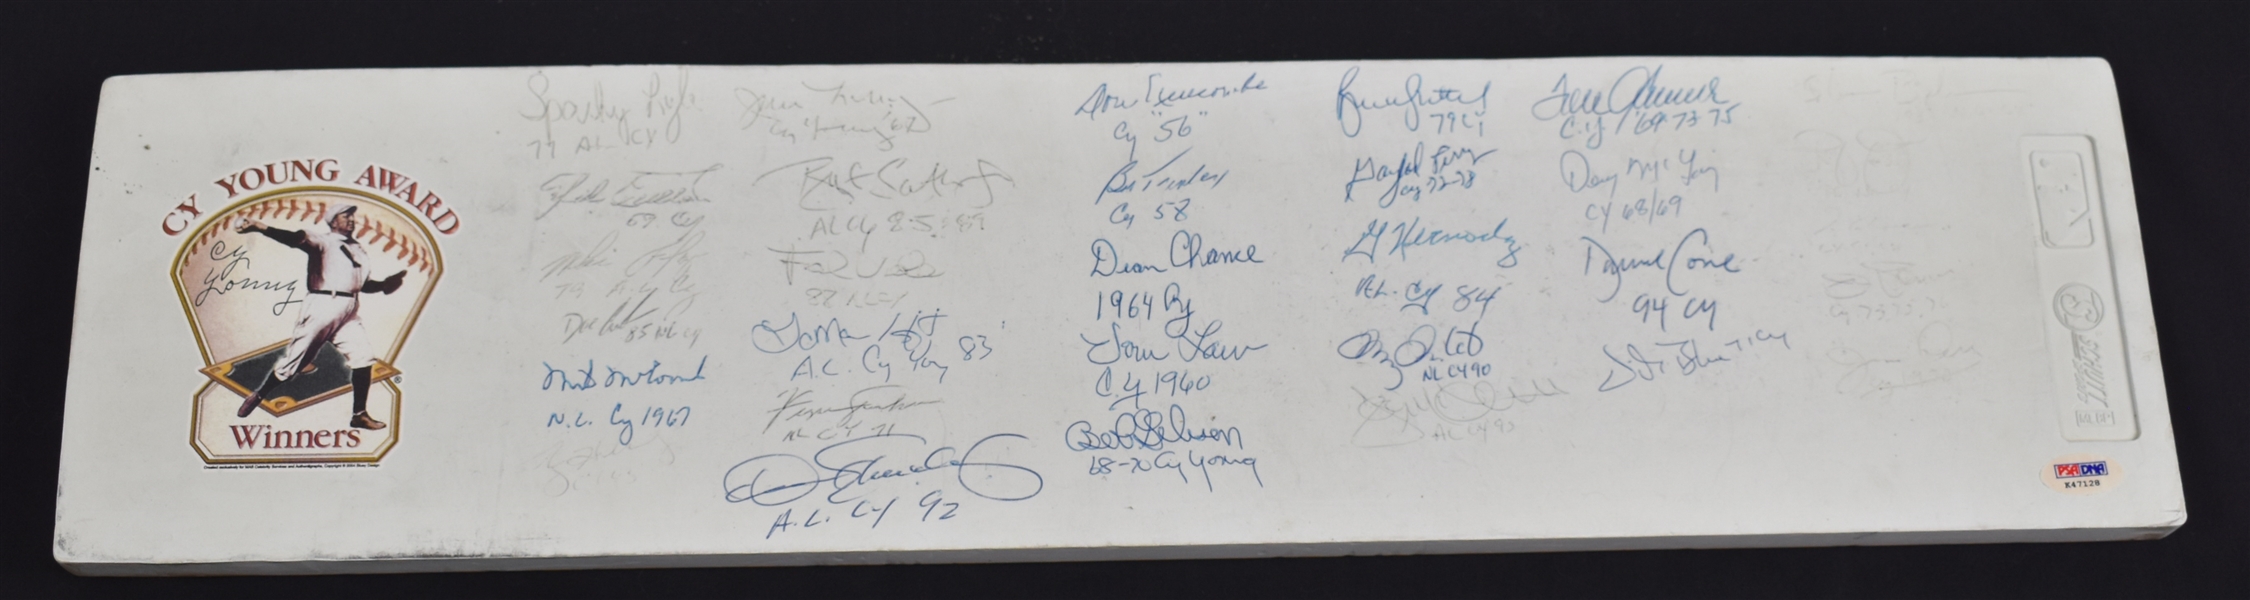 Cy Young Award Winners Autographed Pitching Rubber w/32 Signatures PSA/DNA